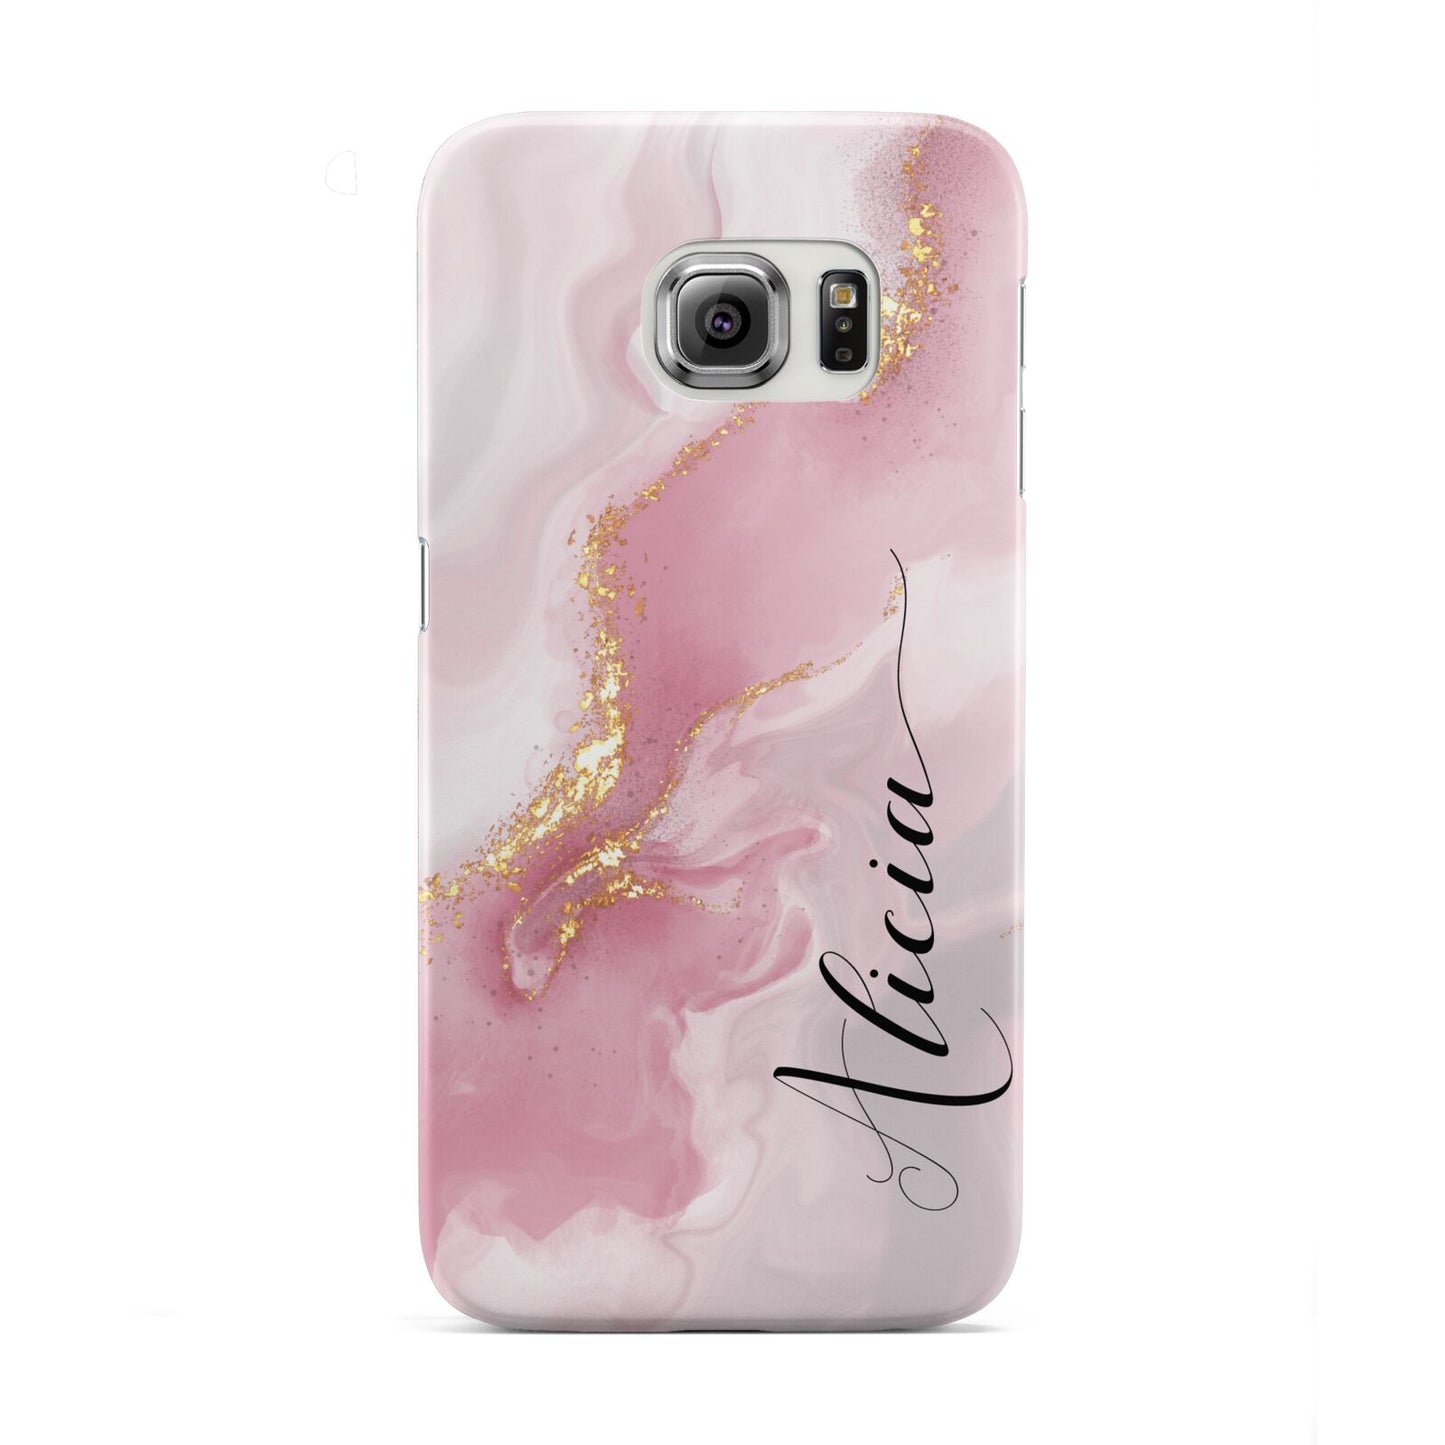 Personalised Pink Marble Samsung Galaxy S6 Edge Case